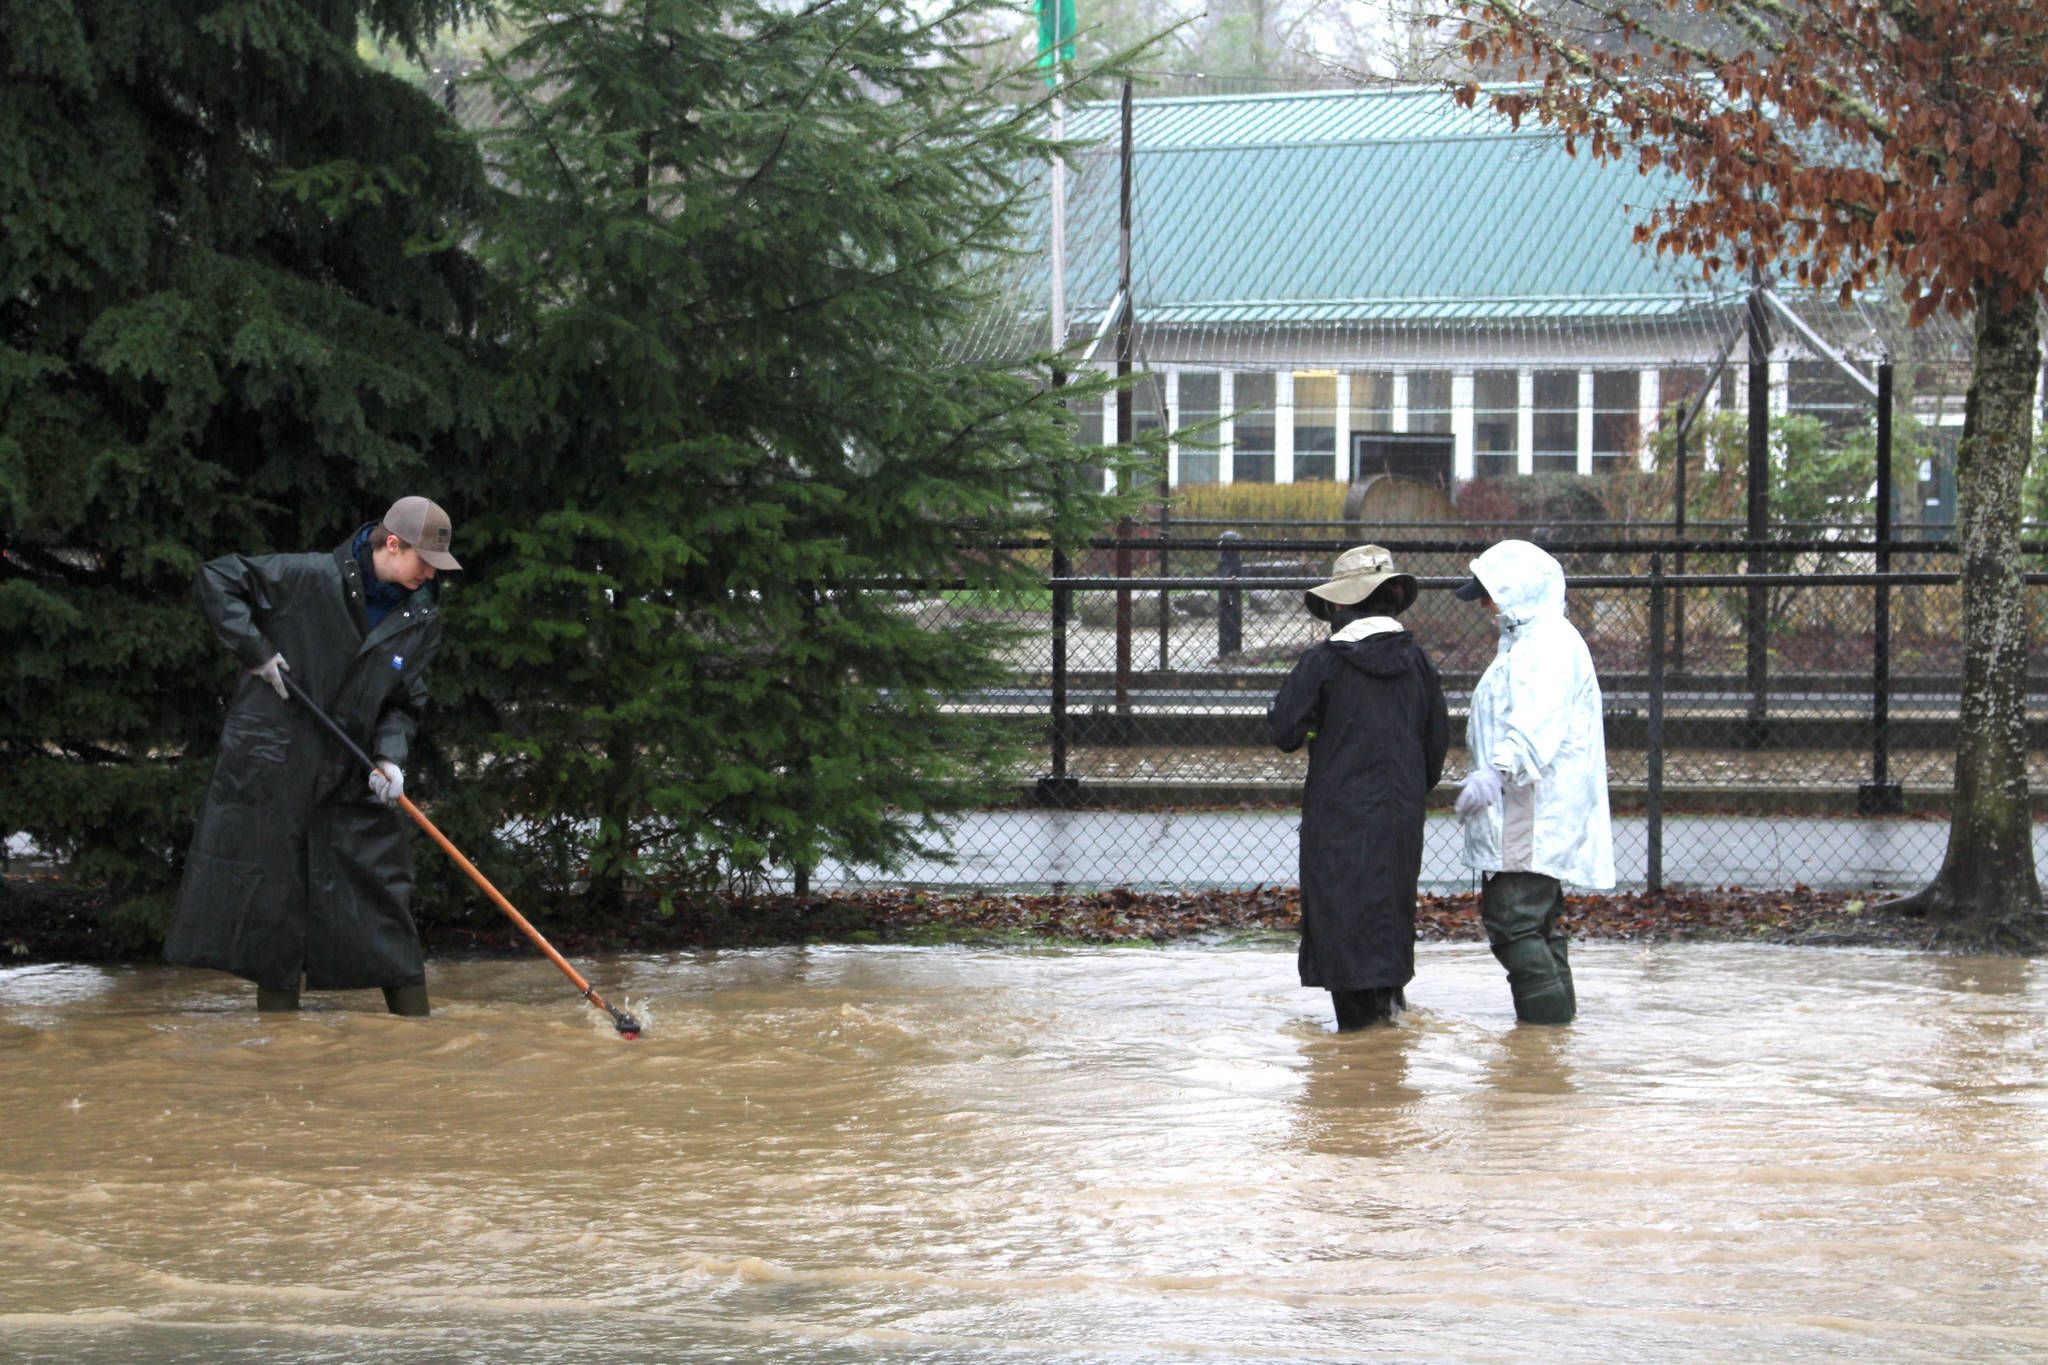 Mitchell Atencio/Staff Photo                                Theo Koshar, Janet McIntosh and Robin Kelley of the Issaquah Salmon Hatchery work to find road drains and clear them of leaves outside the Issaquah Salmon Hatchery in Issaquah on Feb. 6, 2020.